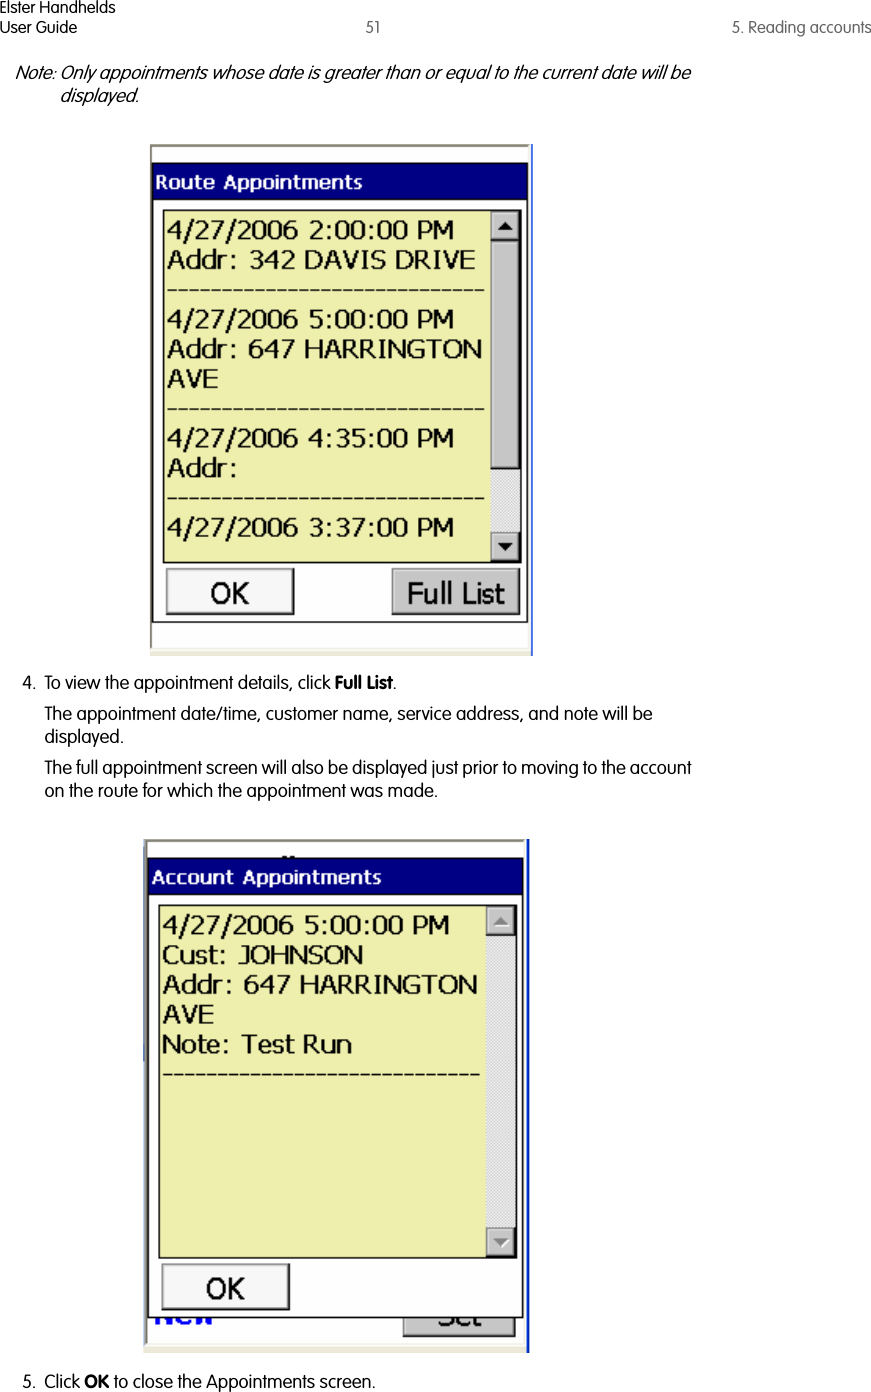 Elster HandheldsUser Guide 51 5. Reading accountsNote: Only appointments whose date is greater than or equal to the current date will be displayed.4. To view the appointment details, click Full List. The appointment date/time, customer name, service address, and note will be displayed. The full appointment screen will also be displayed just prior to moving to the account on the route for which the appointment was made.5. Click OK to close the Appointments screen.